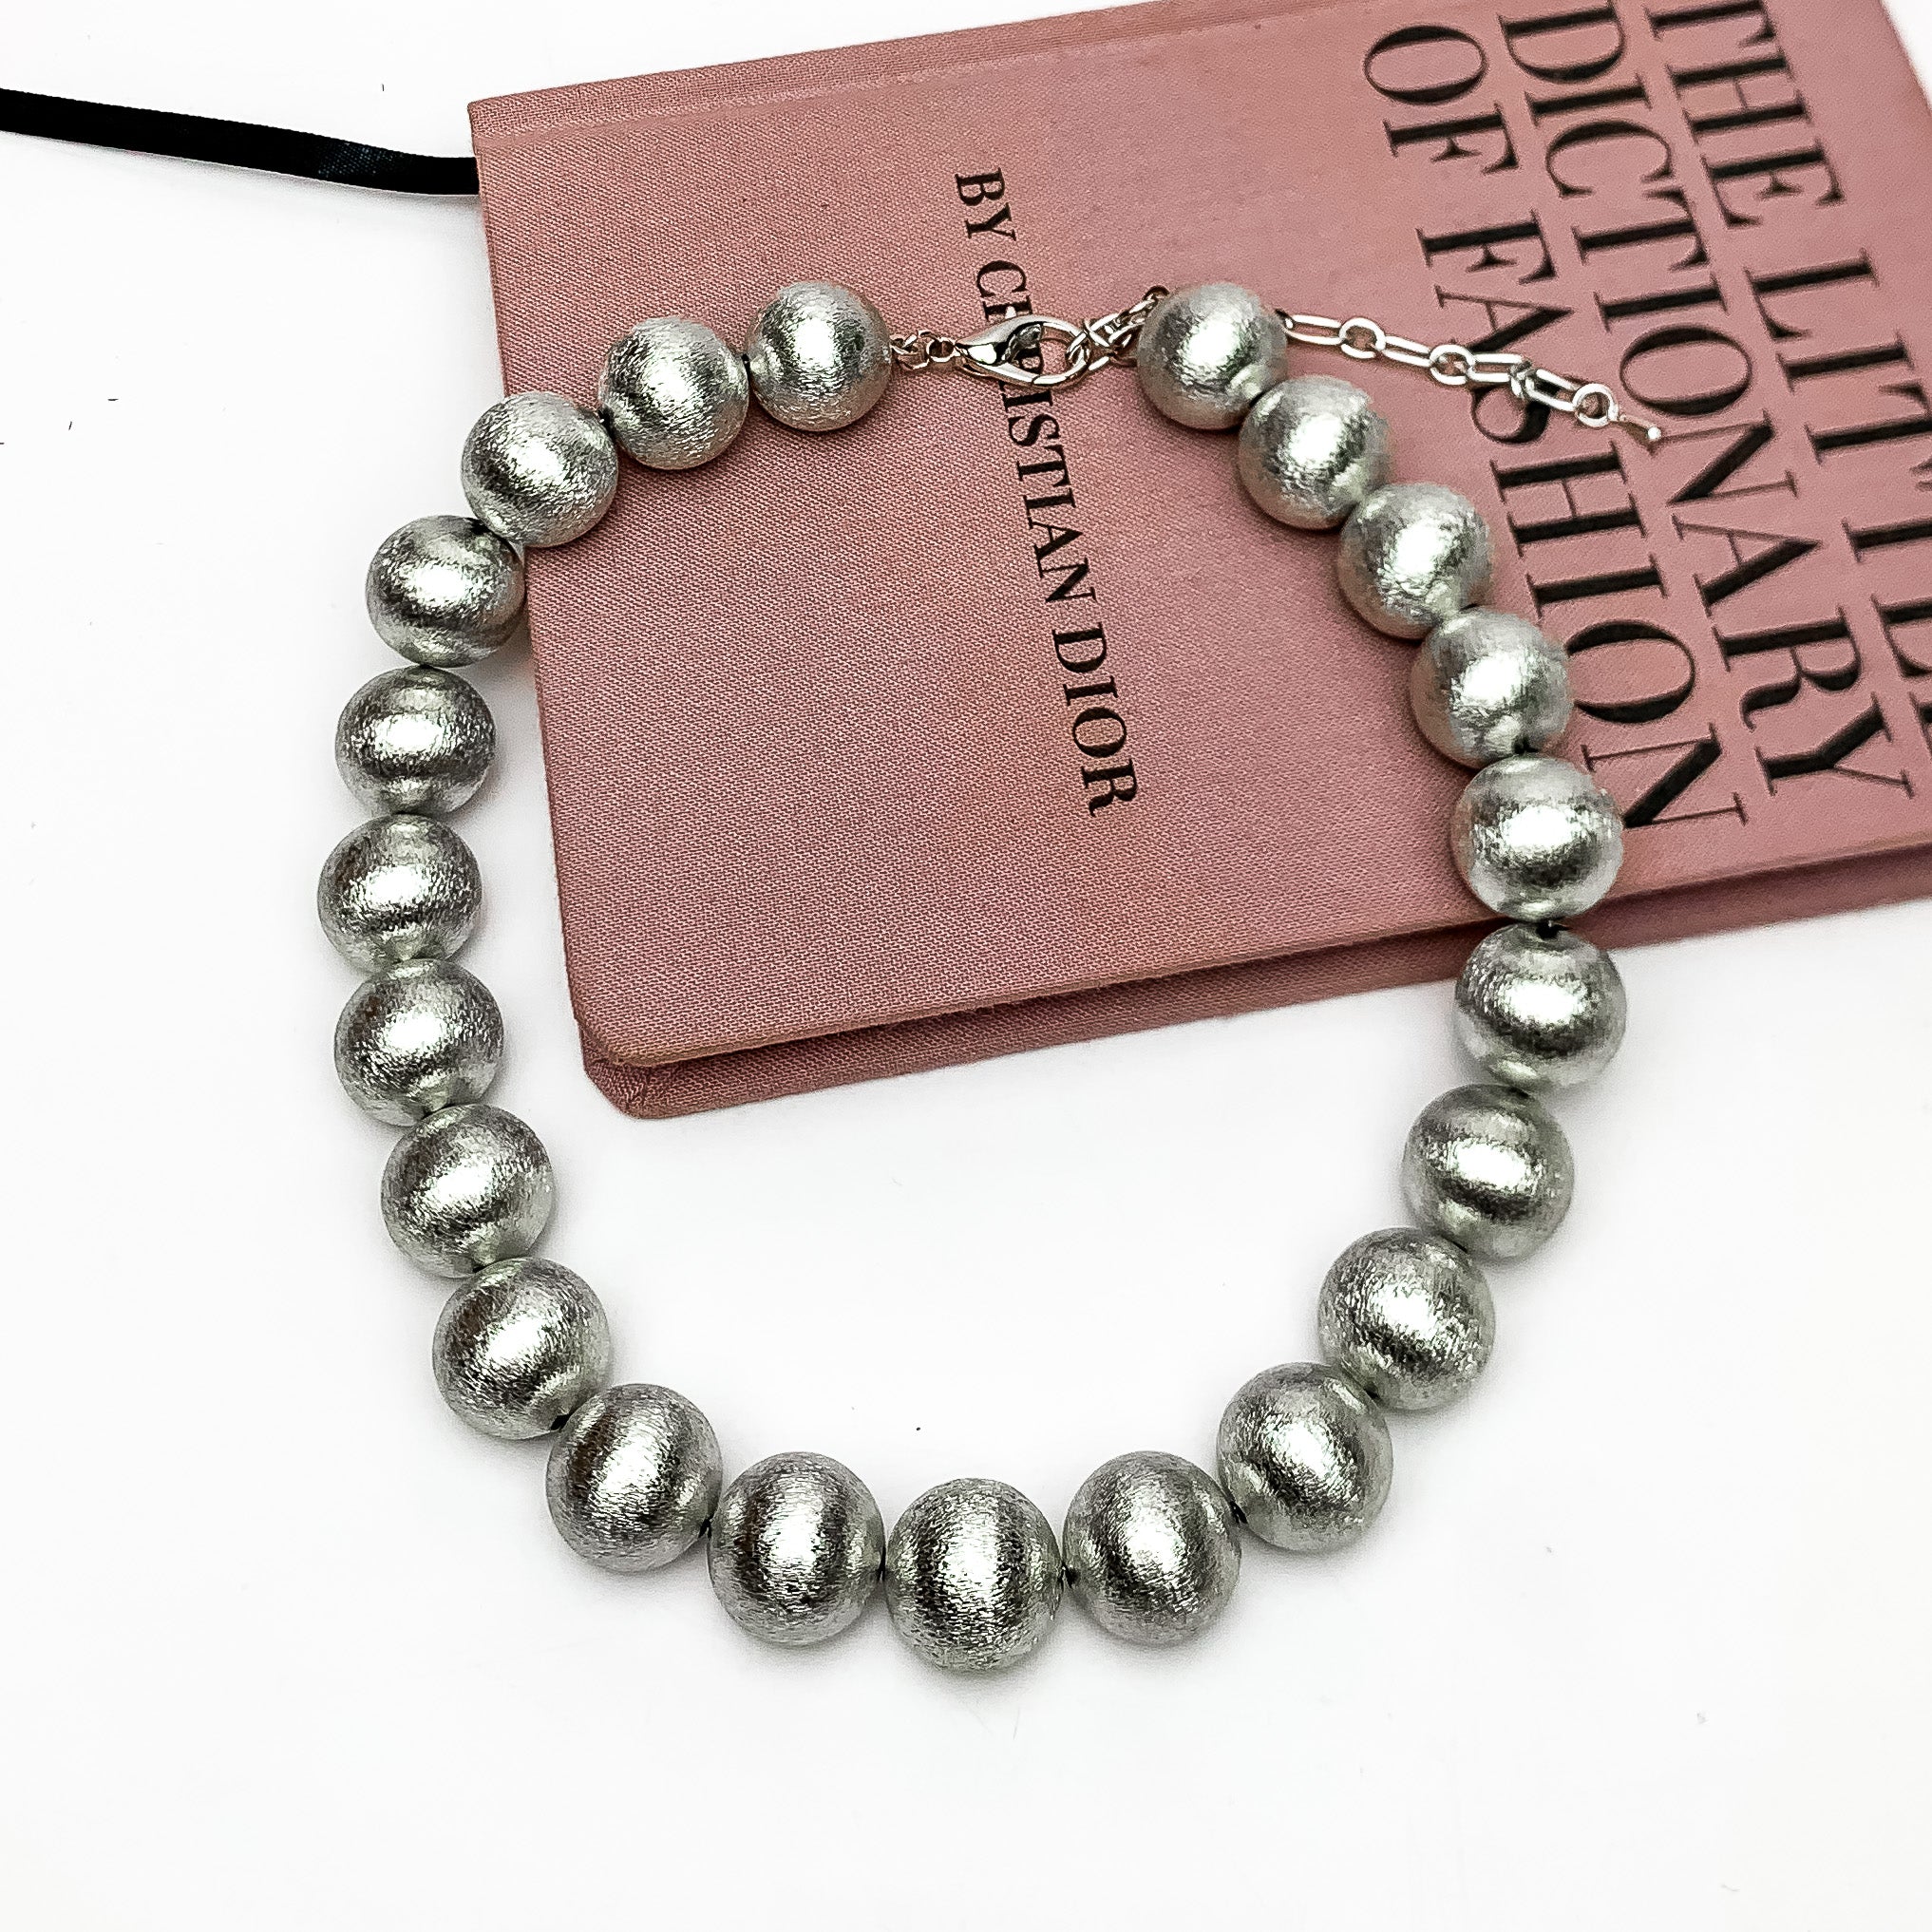 Large Silver Tone Beaded Necklace. This necklace is picktured laying on the side of a pink book with a white background.